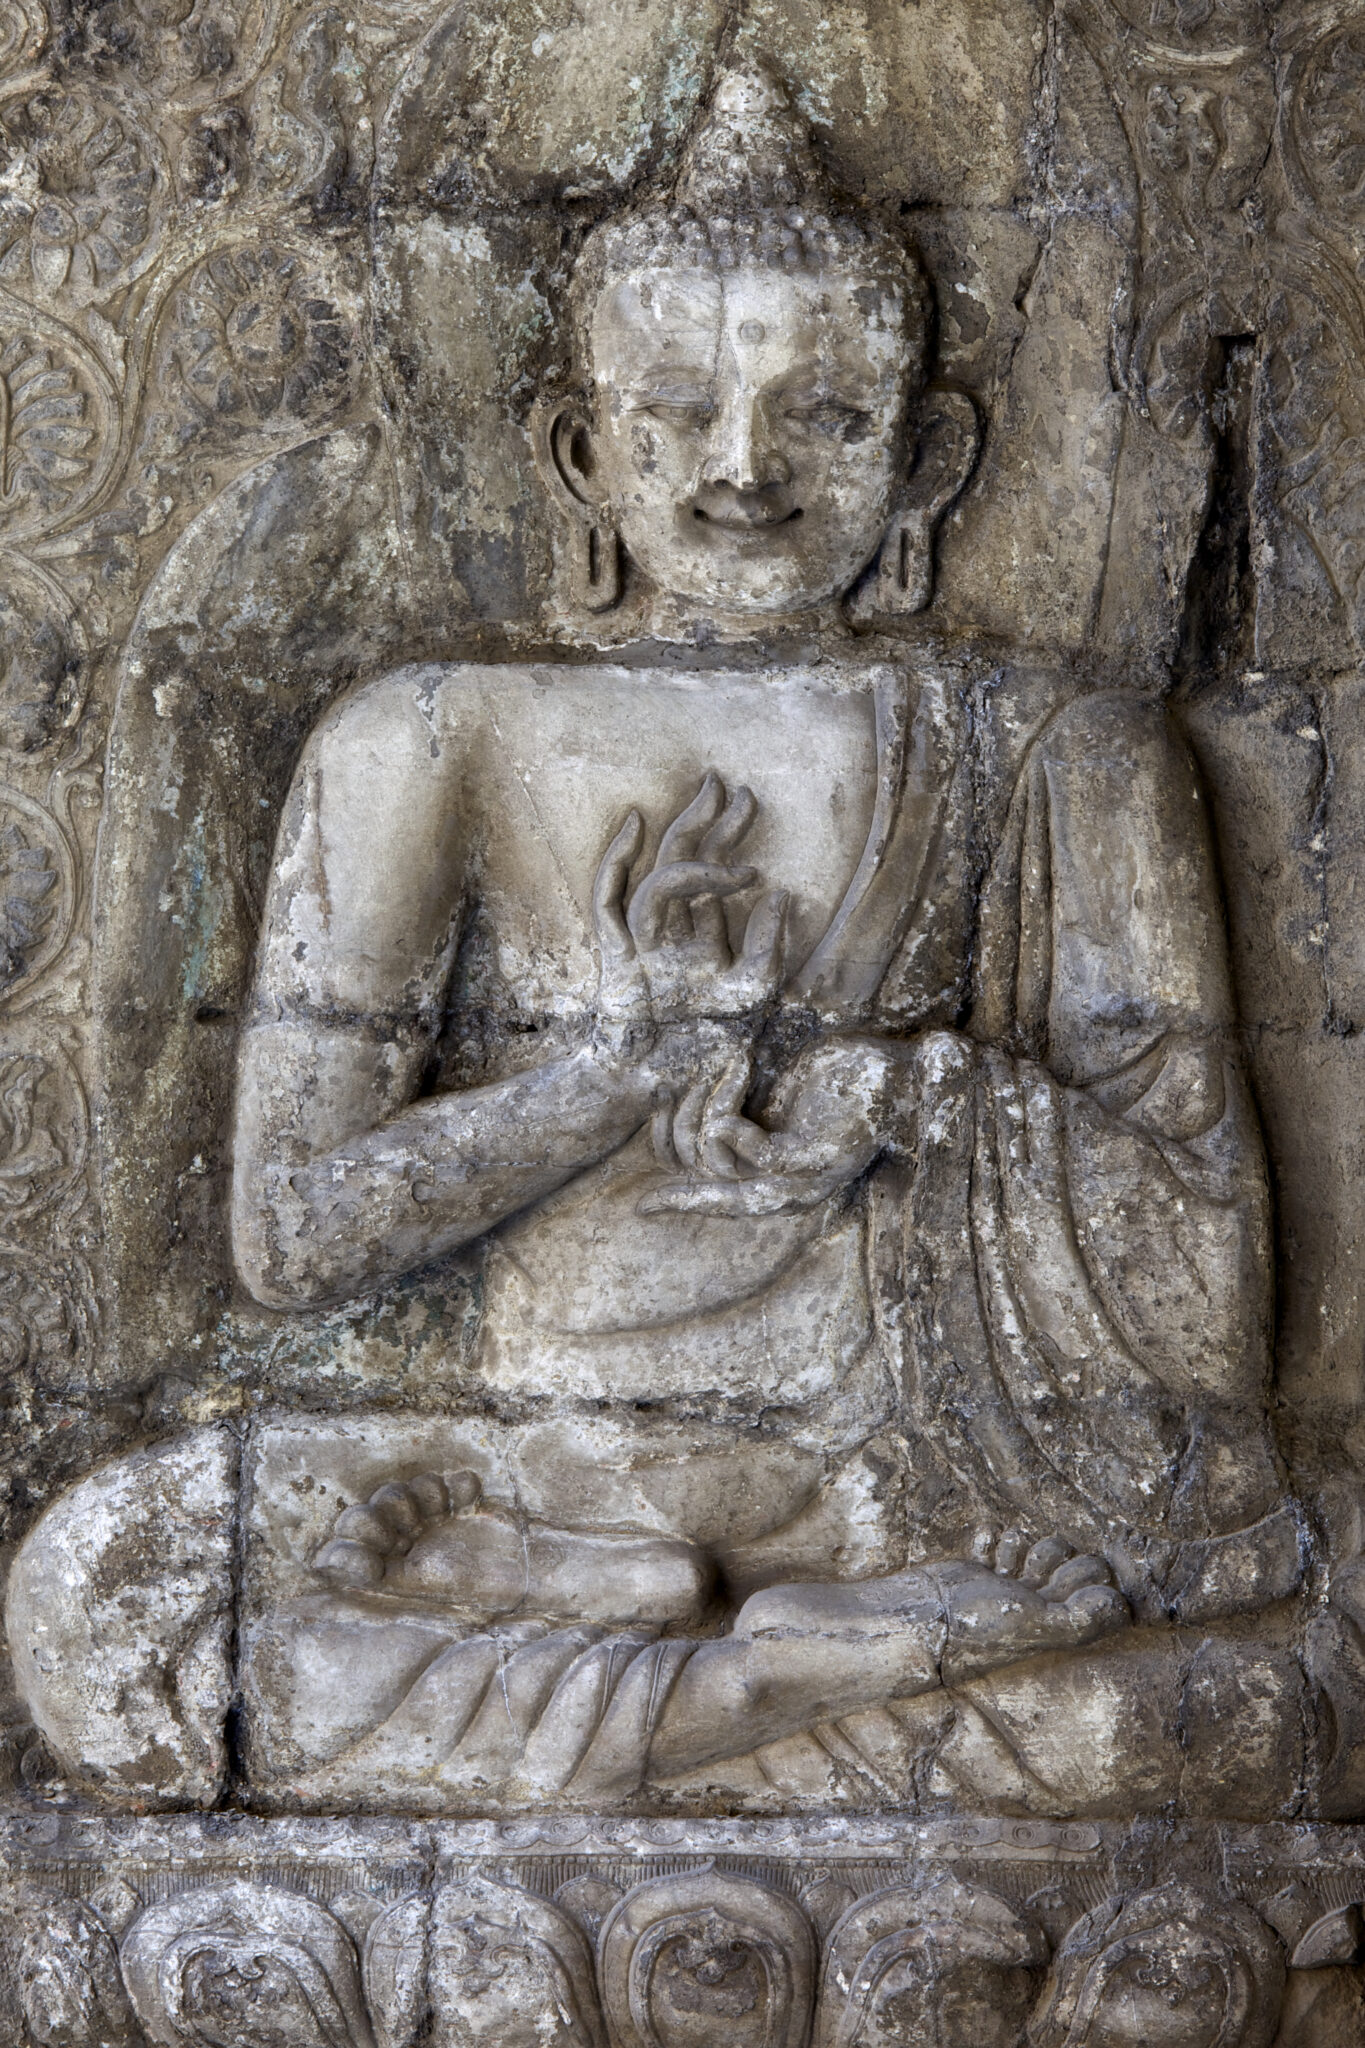 Relief on weathered stone wall depicting seated Buddha with hands posed in mudras at chest